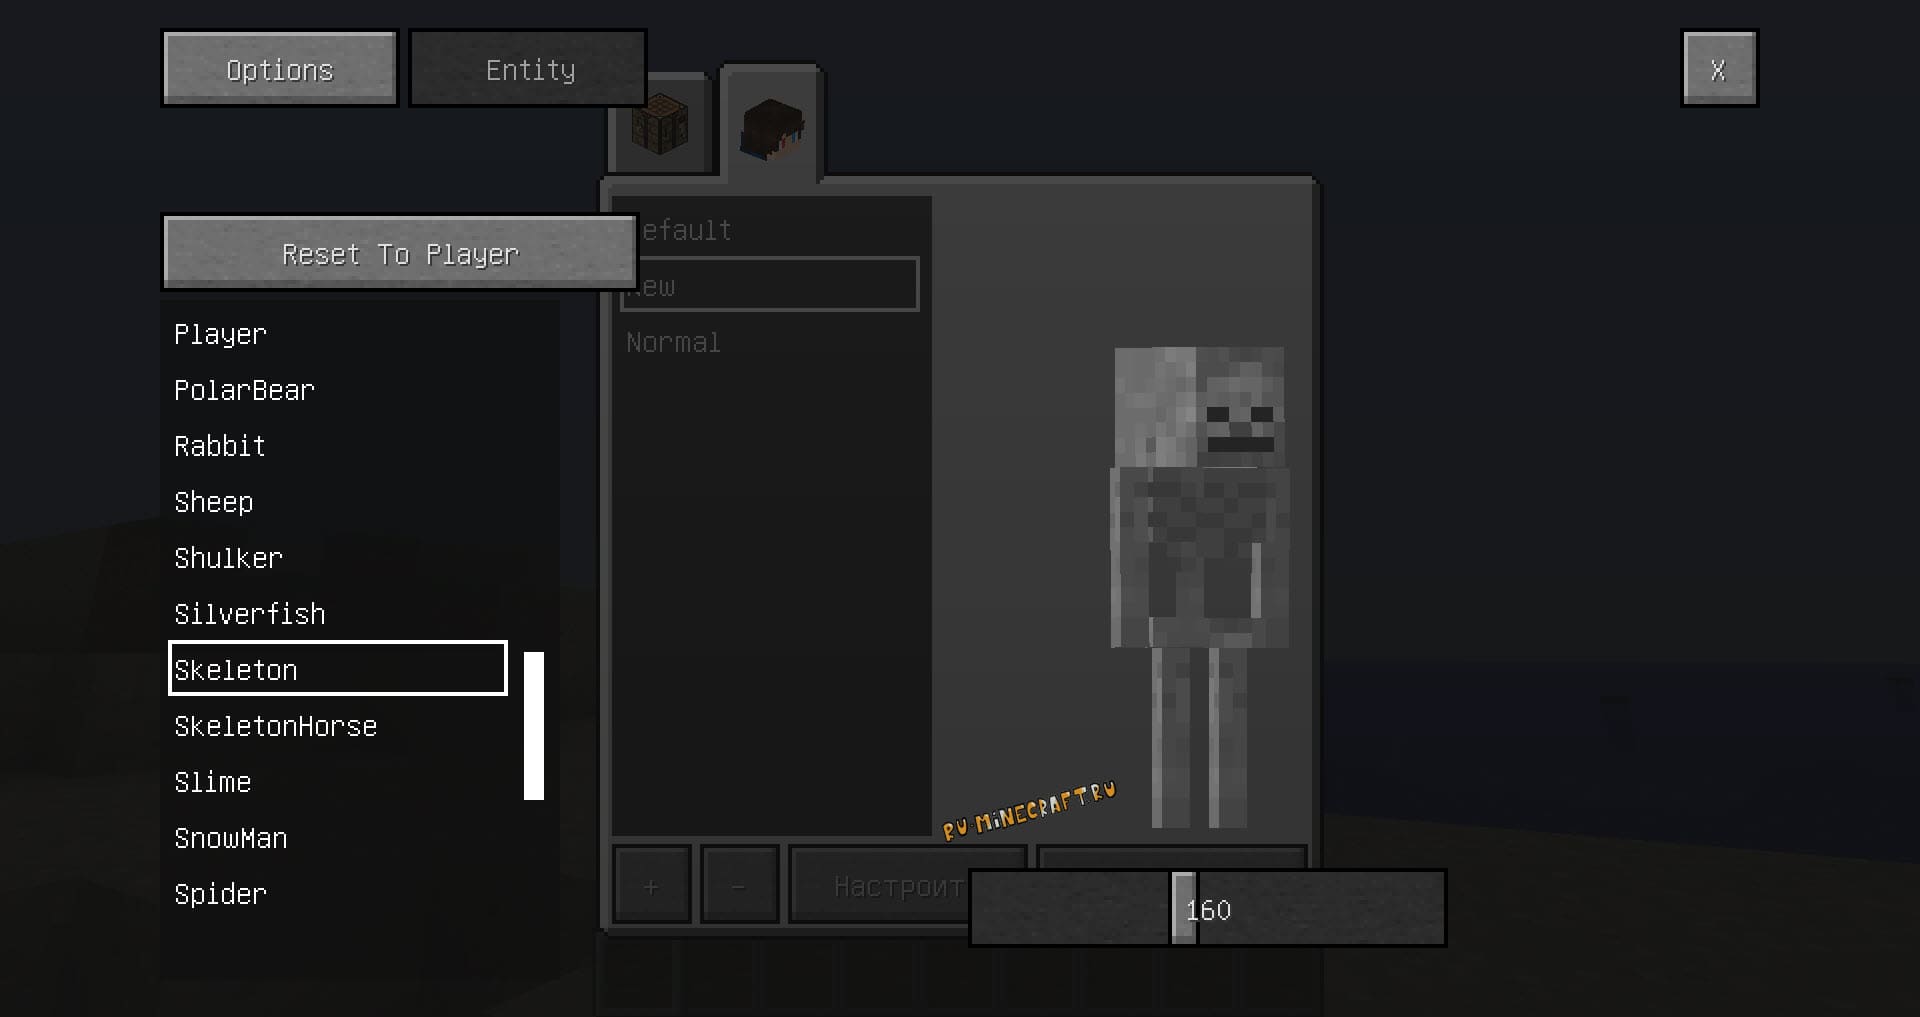 1.11.2 more player models